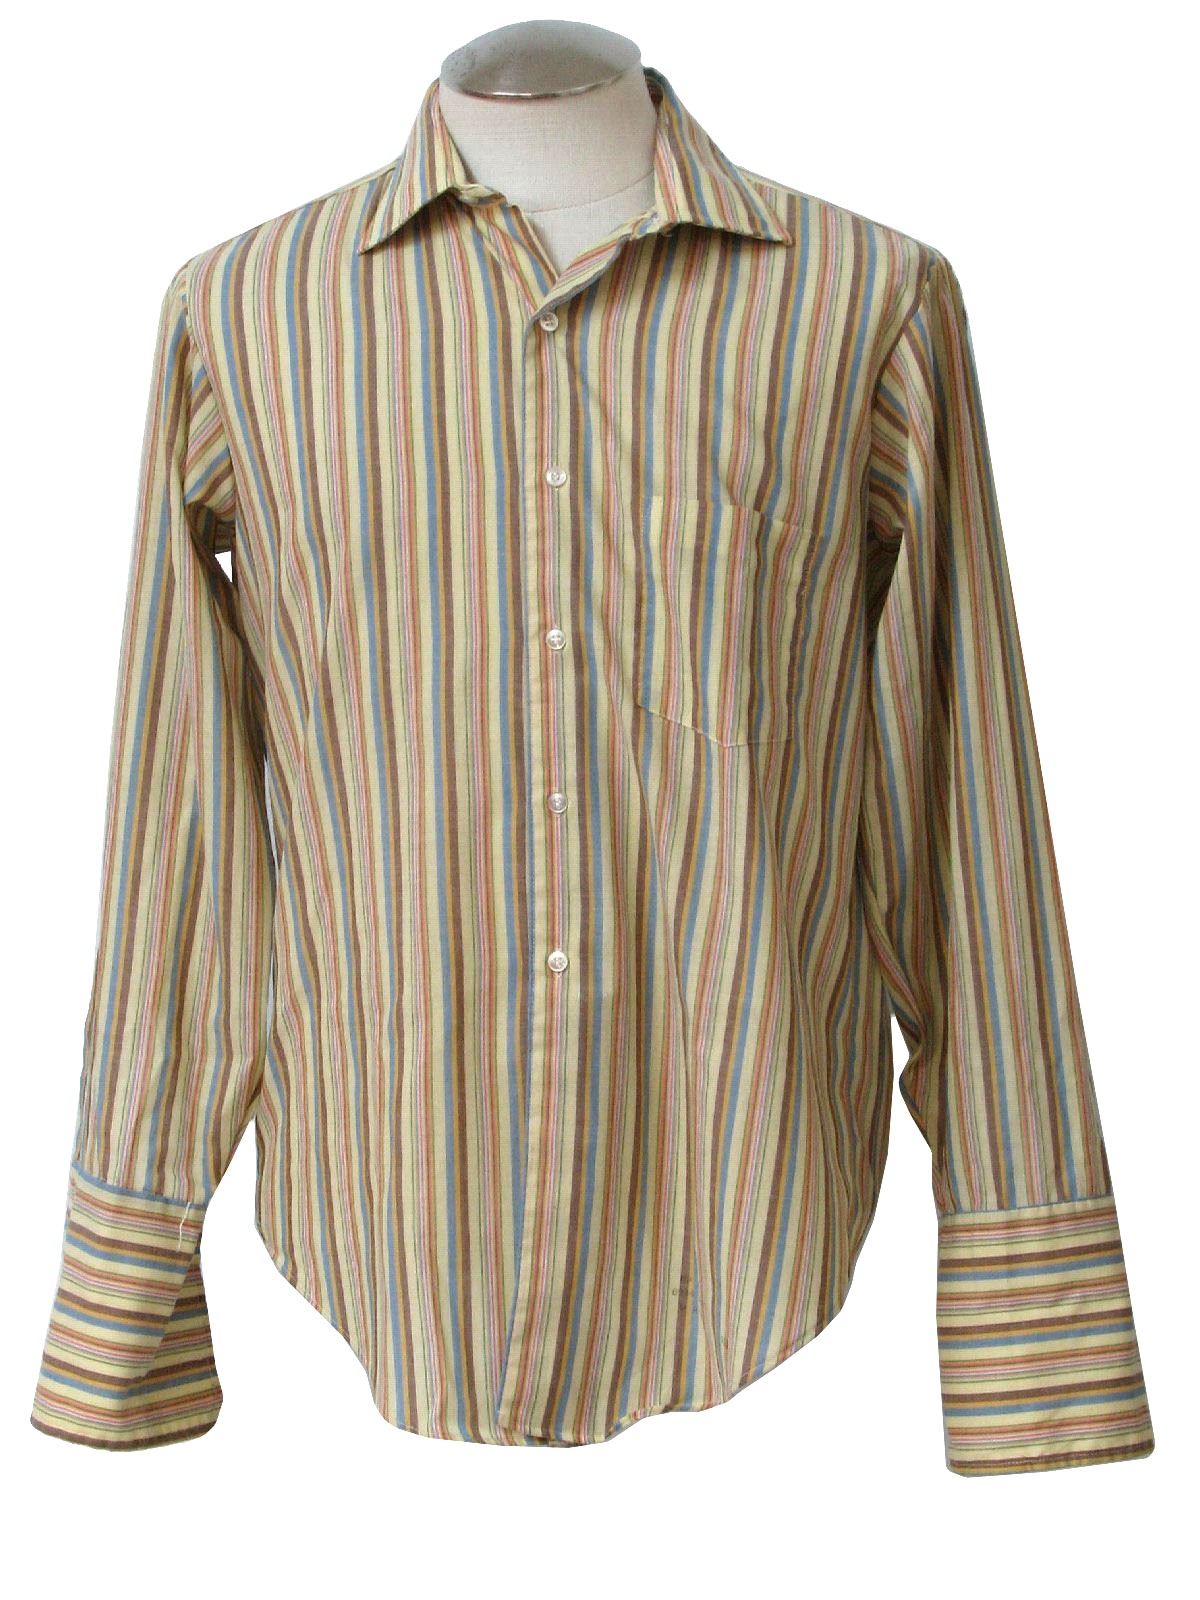 Retro 1970's Shirt (Fruit of the Loom) : 70s -Fruit of the Loom- Mens ...